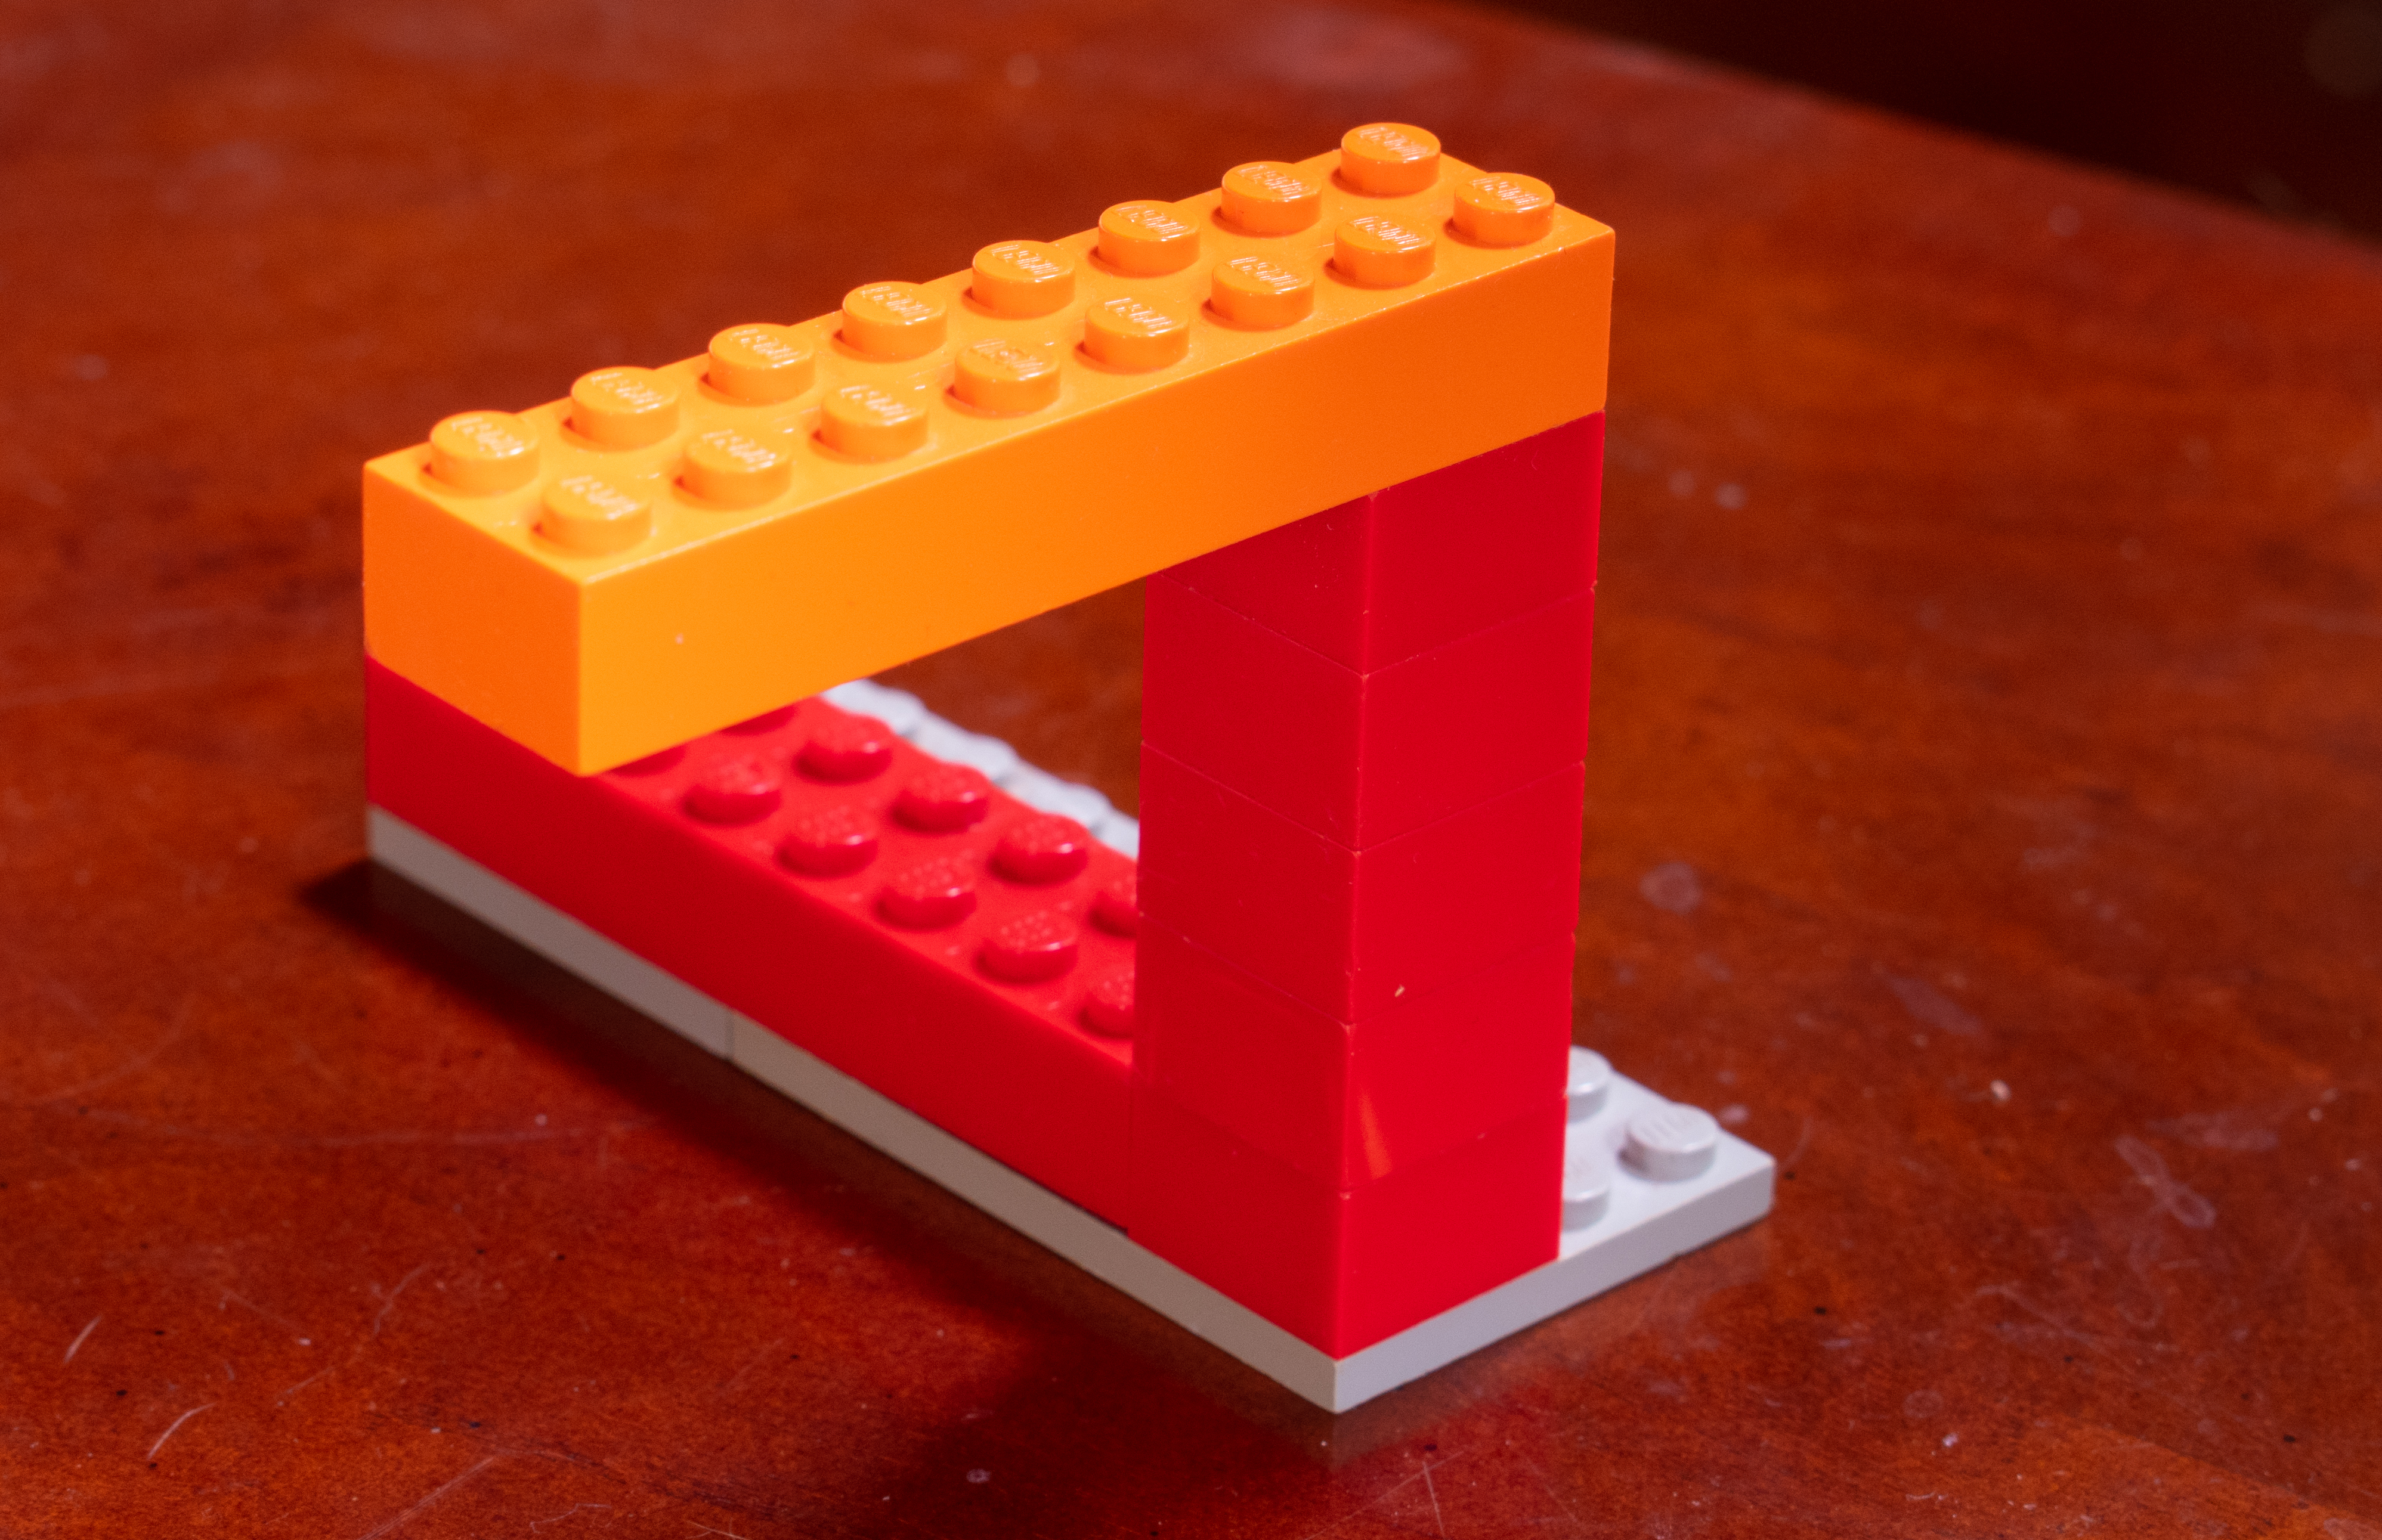 An impossible triangle built out of lego.